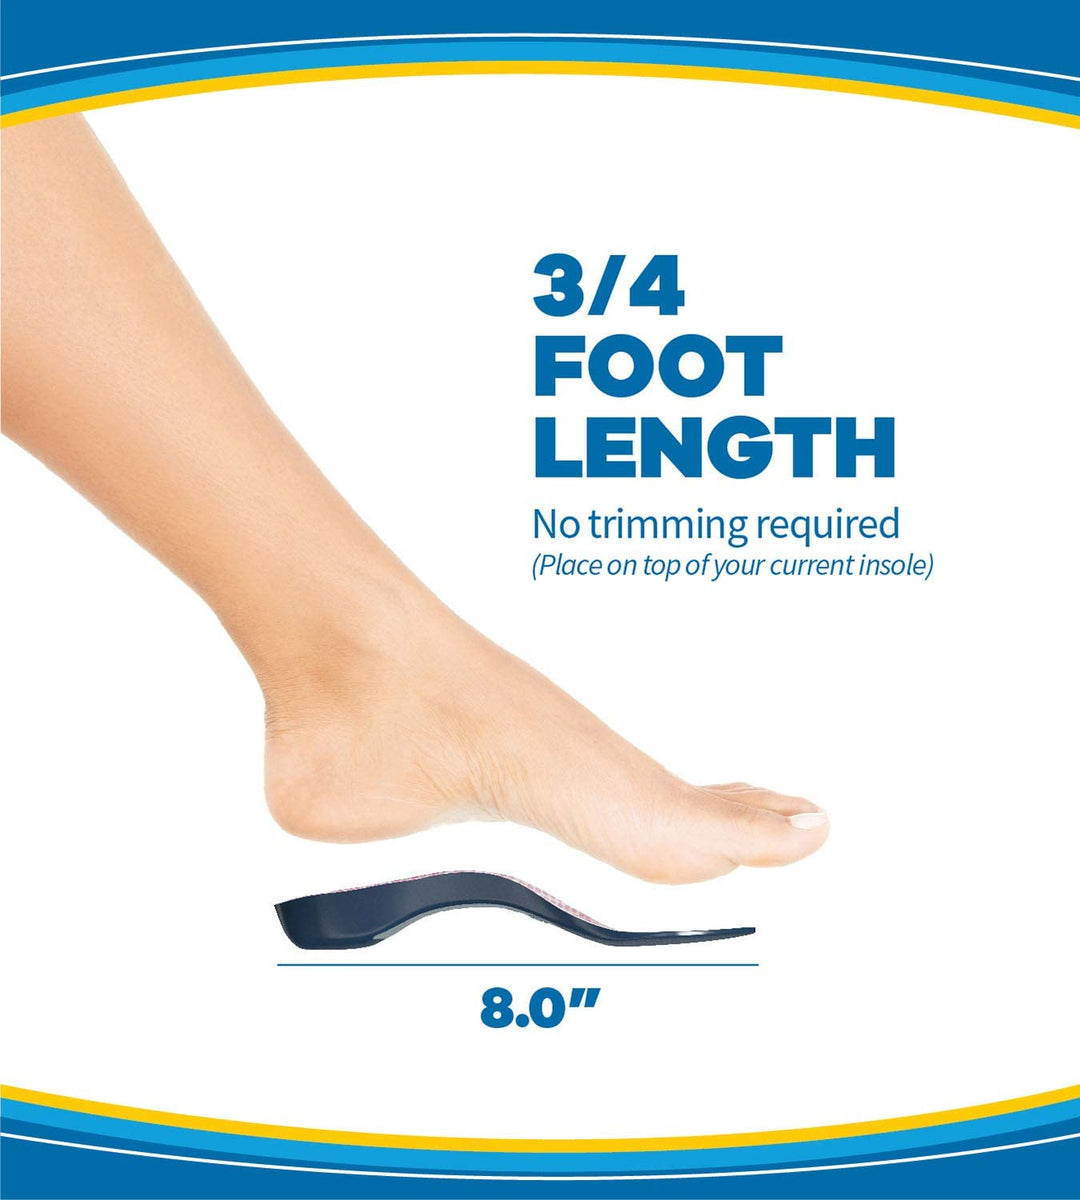 Dr. Scholl's Tri-Comfort Insoles - for Heel, Arch Support and Ball of Foot with Targeted Cushioning (for Women's 6-10) - 3alababak